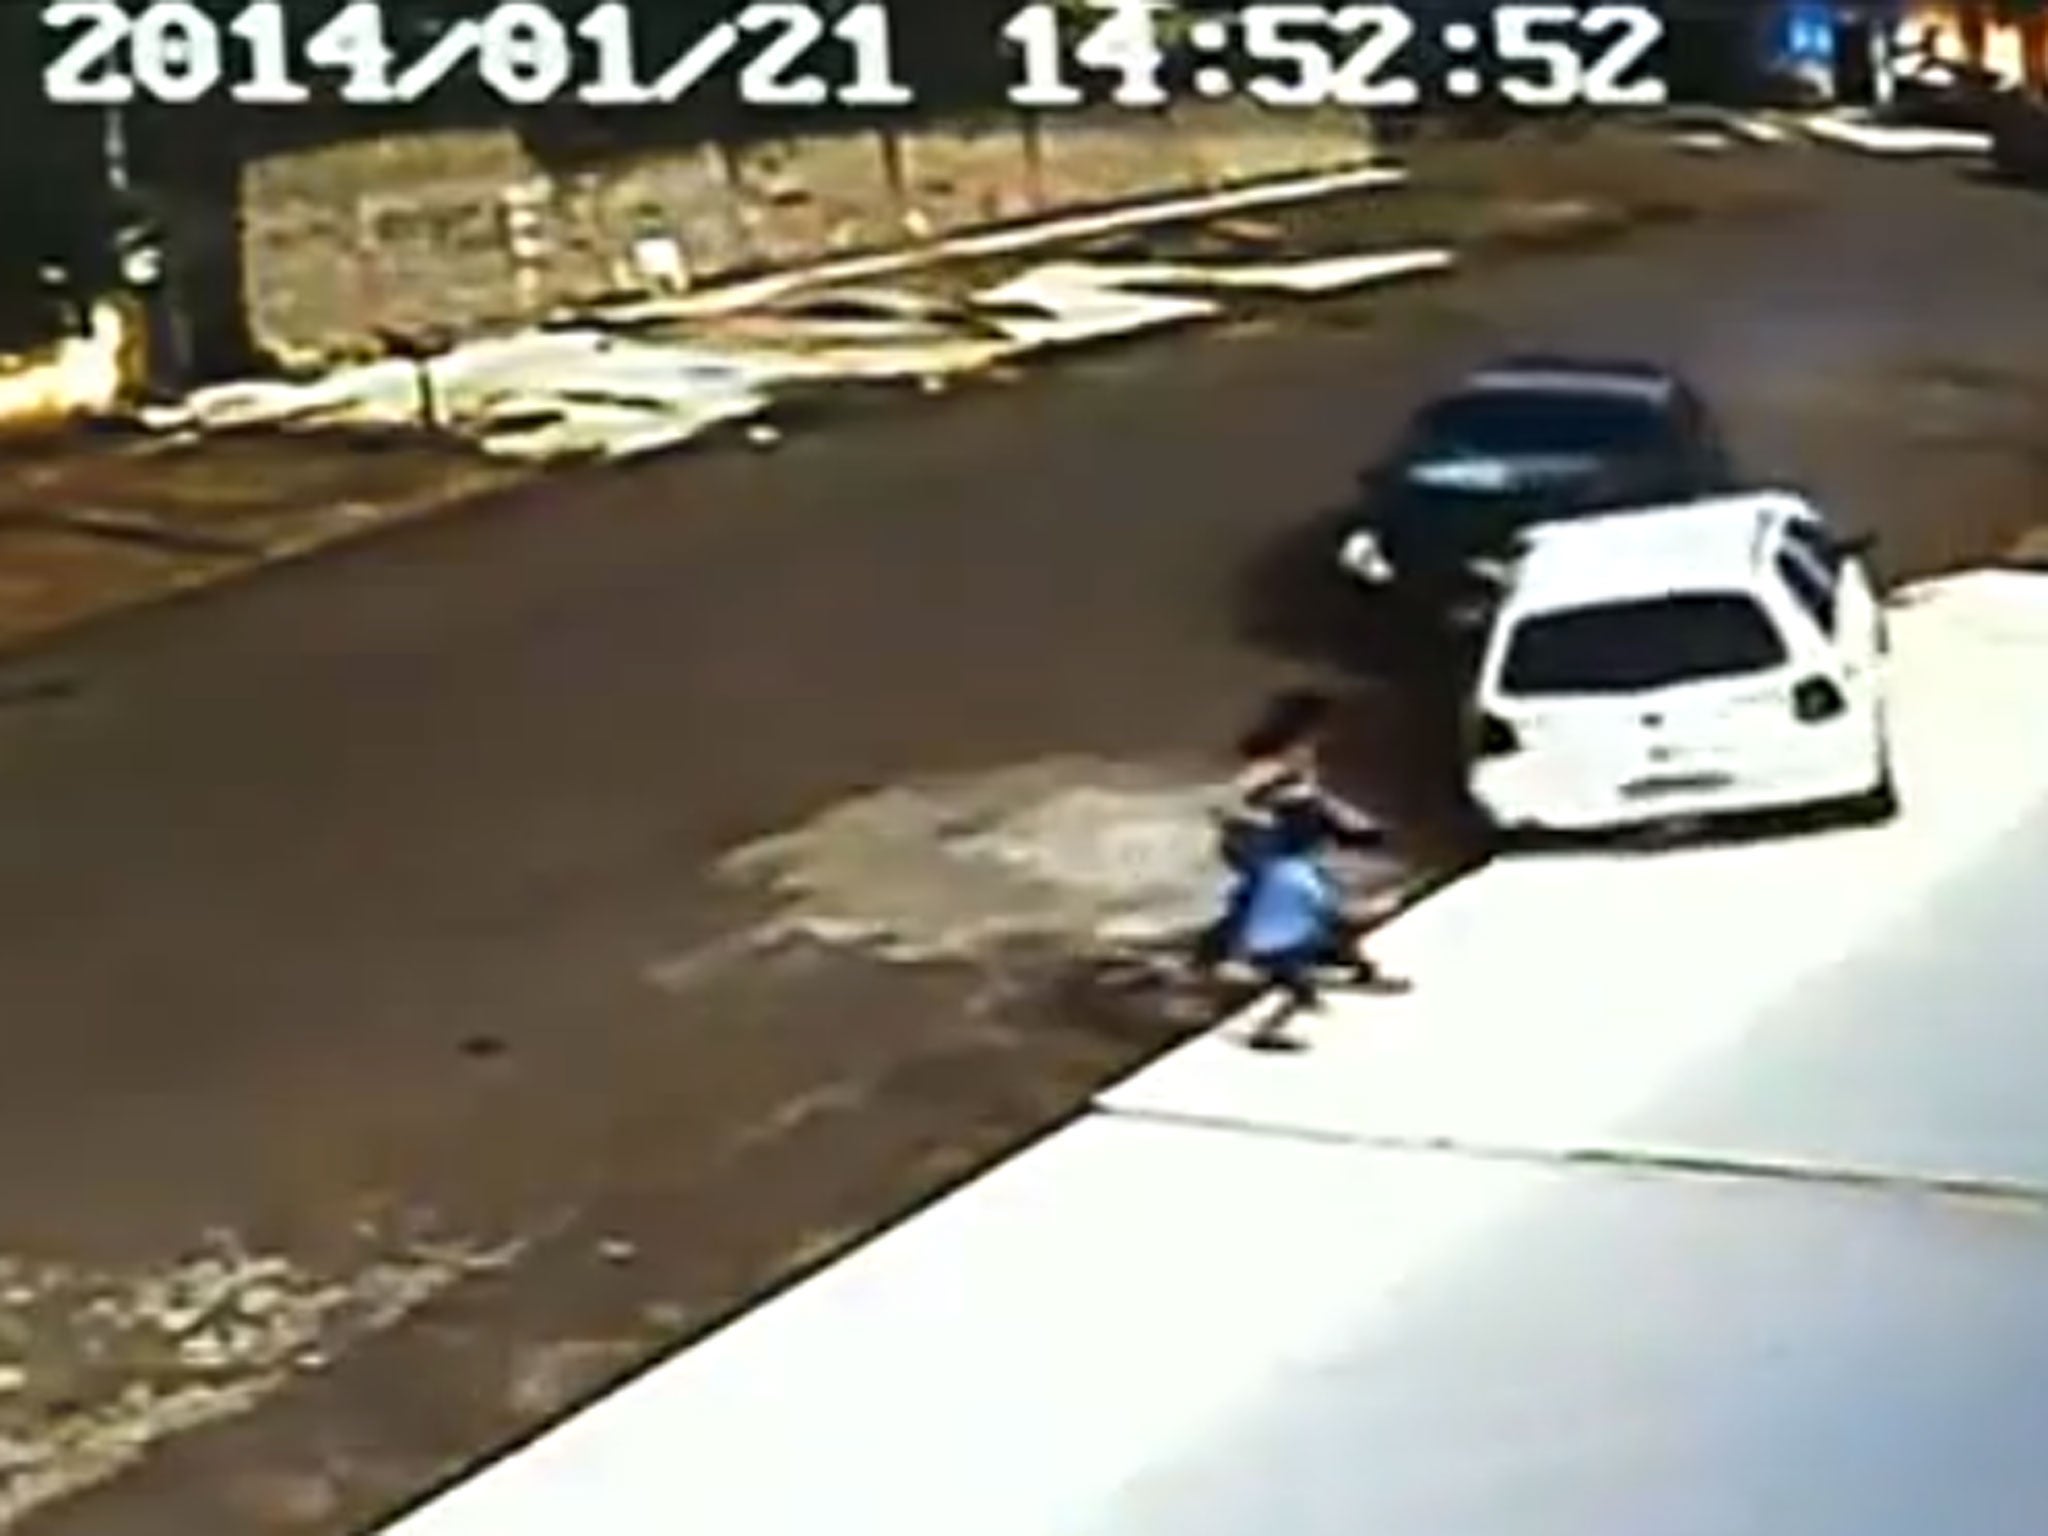 Footage posted online showed the extraordinary moment this woman and child were mown down by an out-of-control car - and jumped straight back up